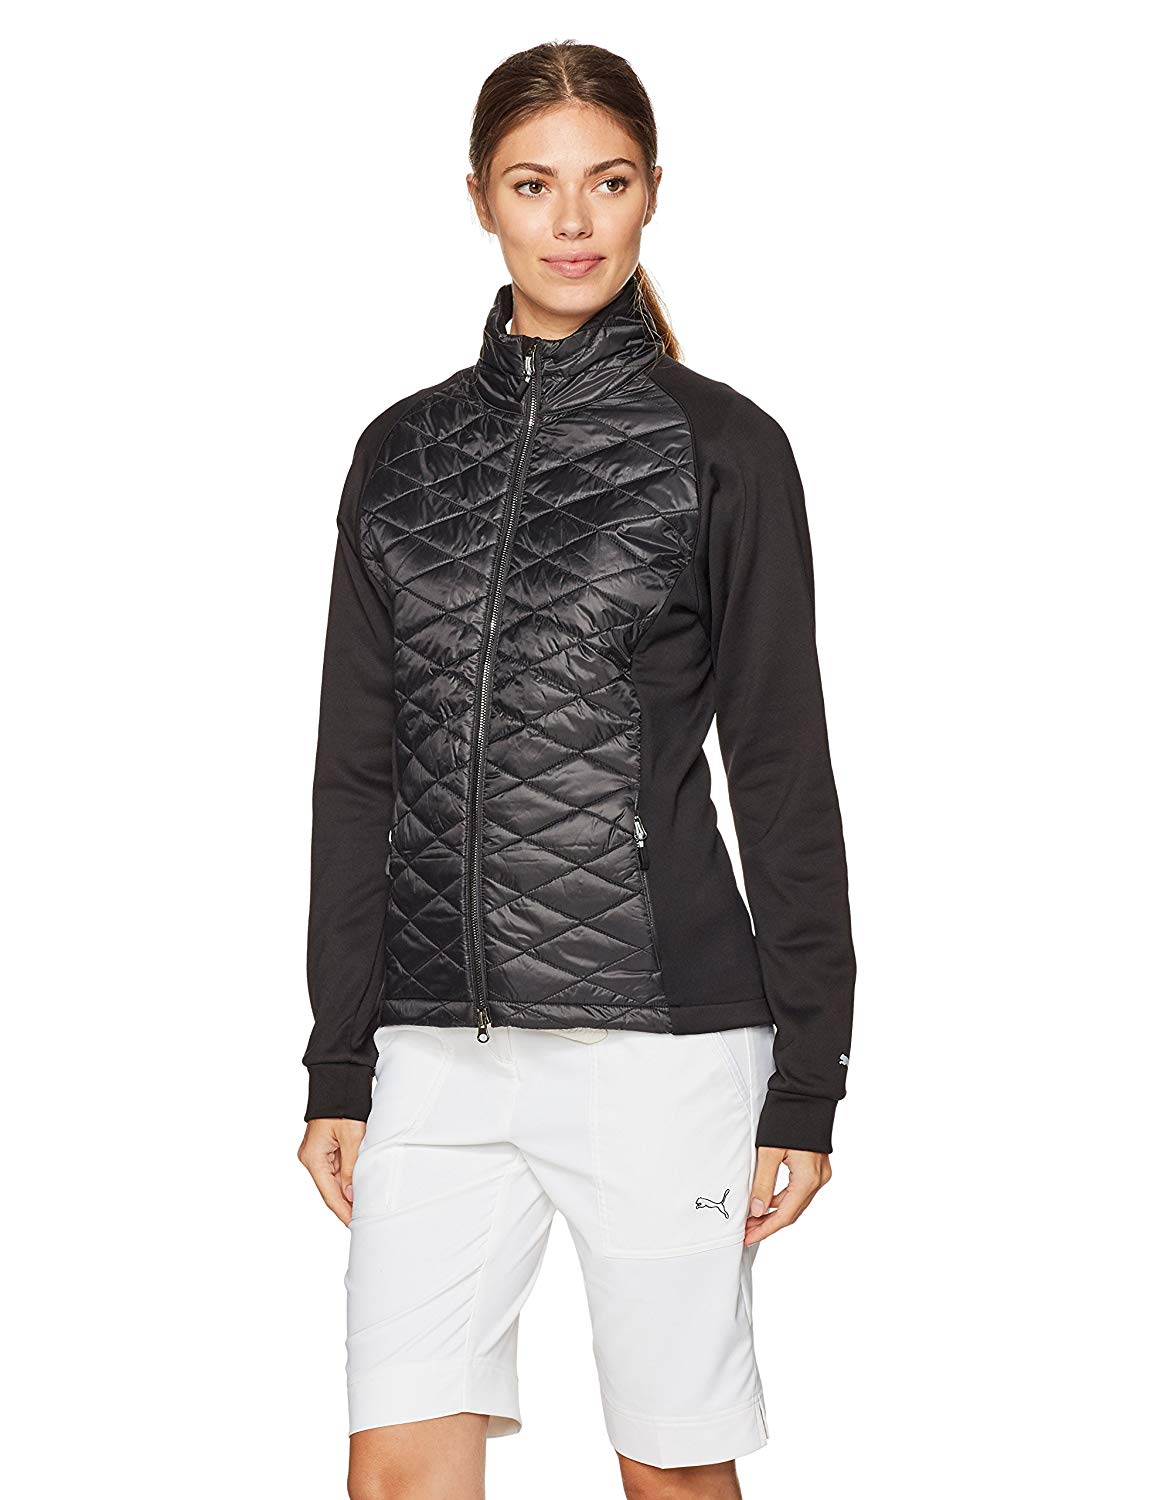 Buy Puma Womens Golf Jackets for Best Prices Online!